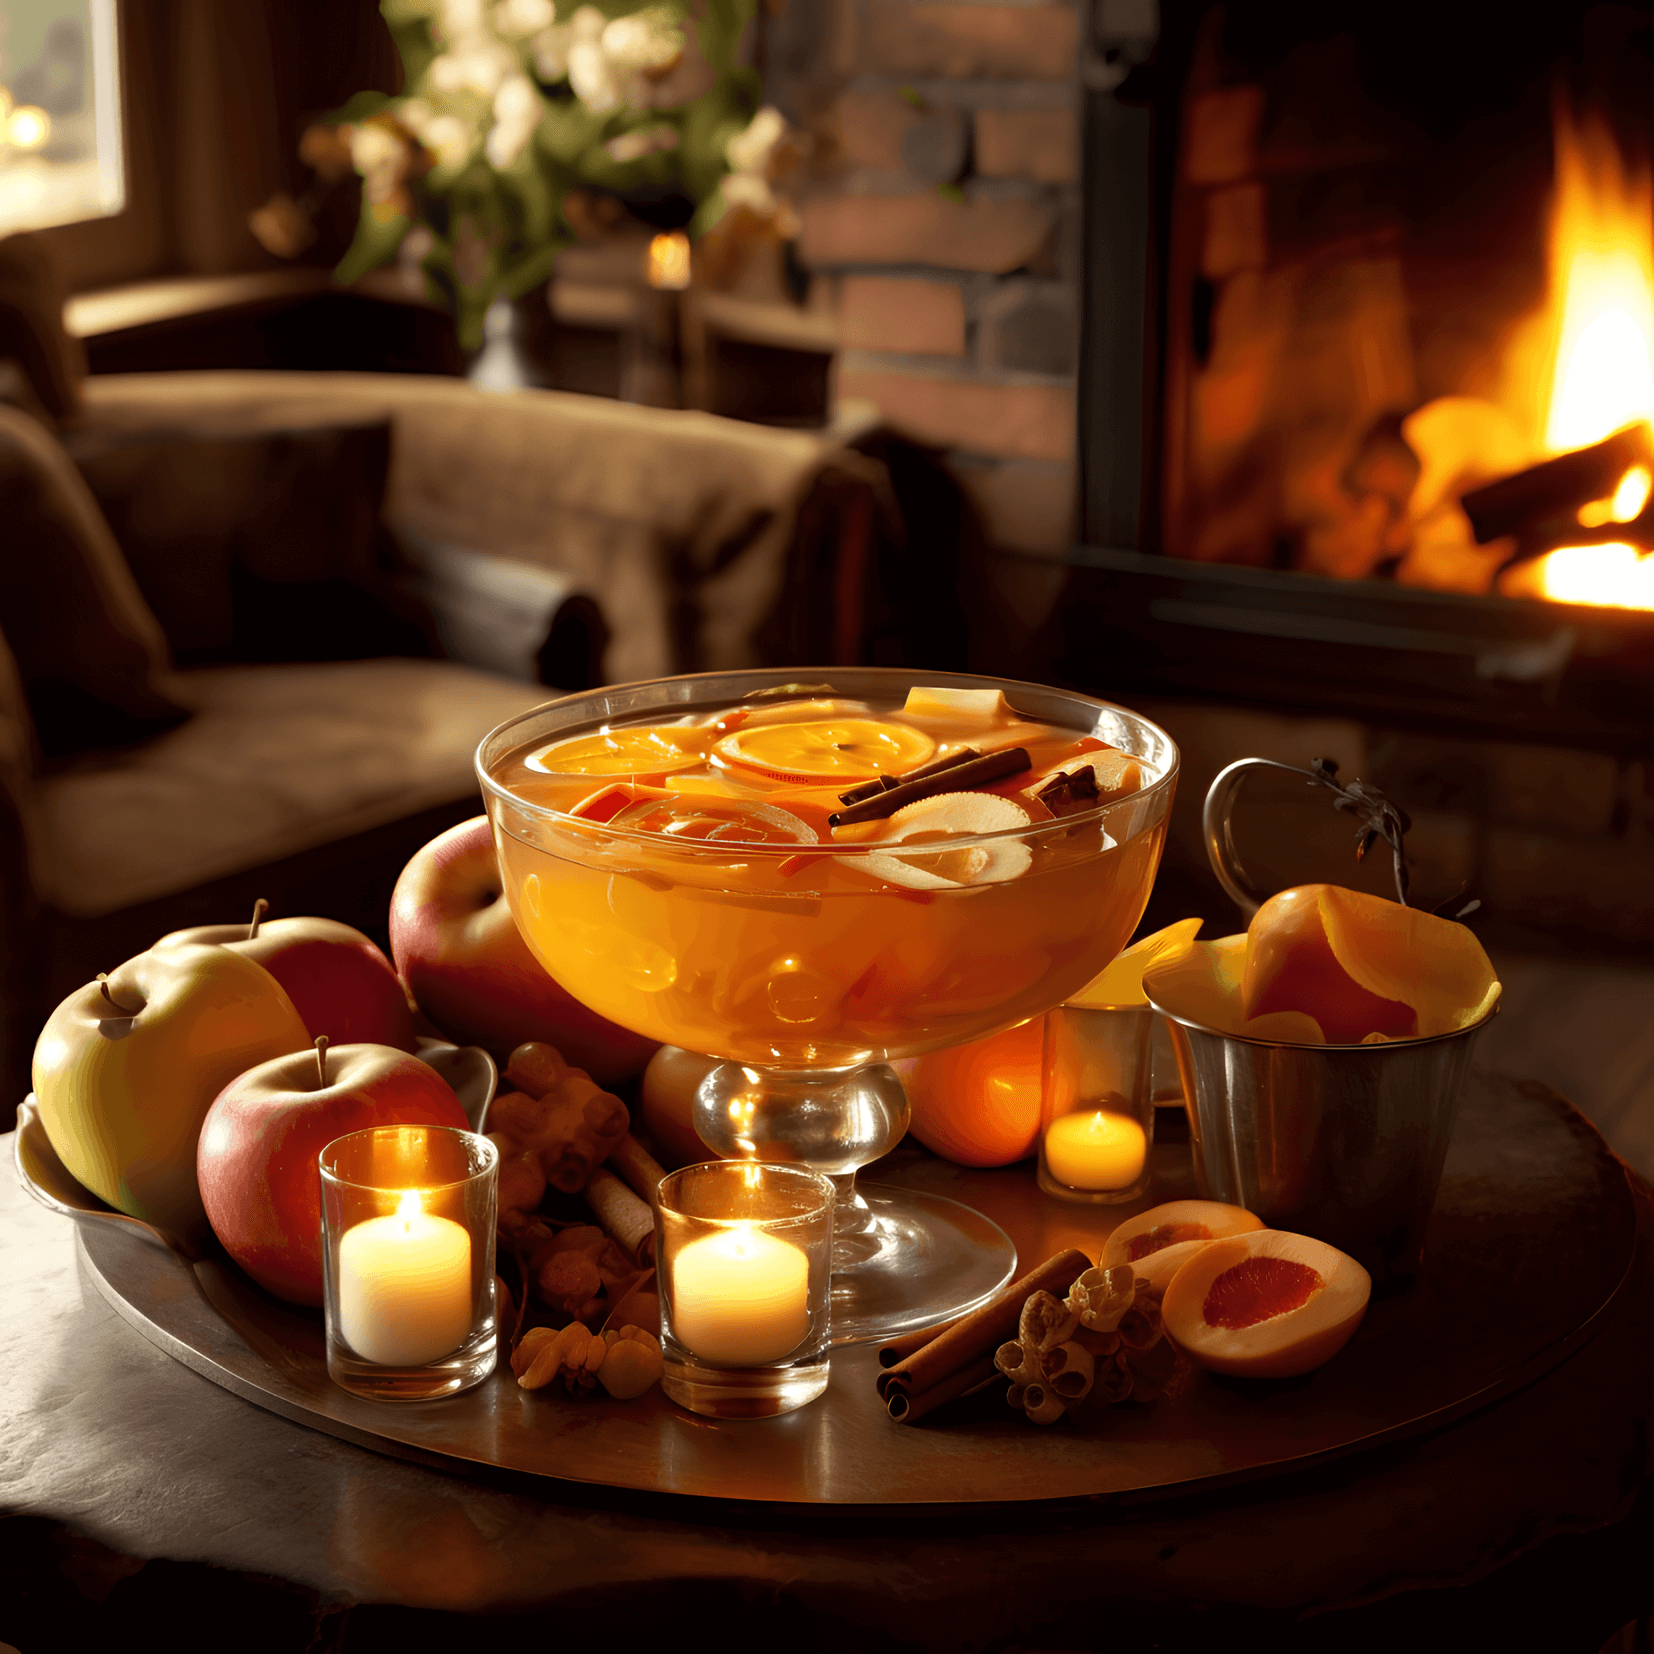 Cider Punch is a delightful combination of sweet, tangy, and spicy flavors. The apple cider provides a natural sweetness, while the lemon juice adds a refreshing tartness. The cinnamon and other spices bring warmth and complexity to the drink, making it perfect for sipping on a chilly evening.